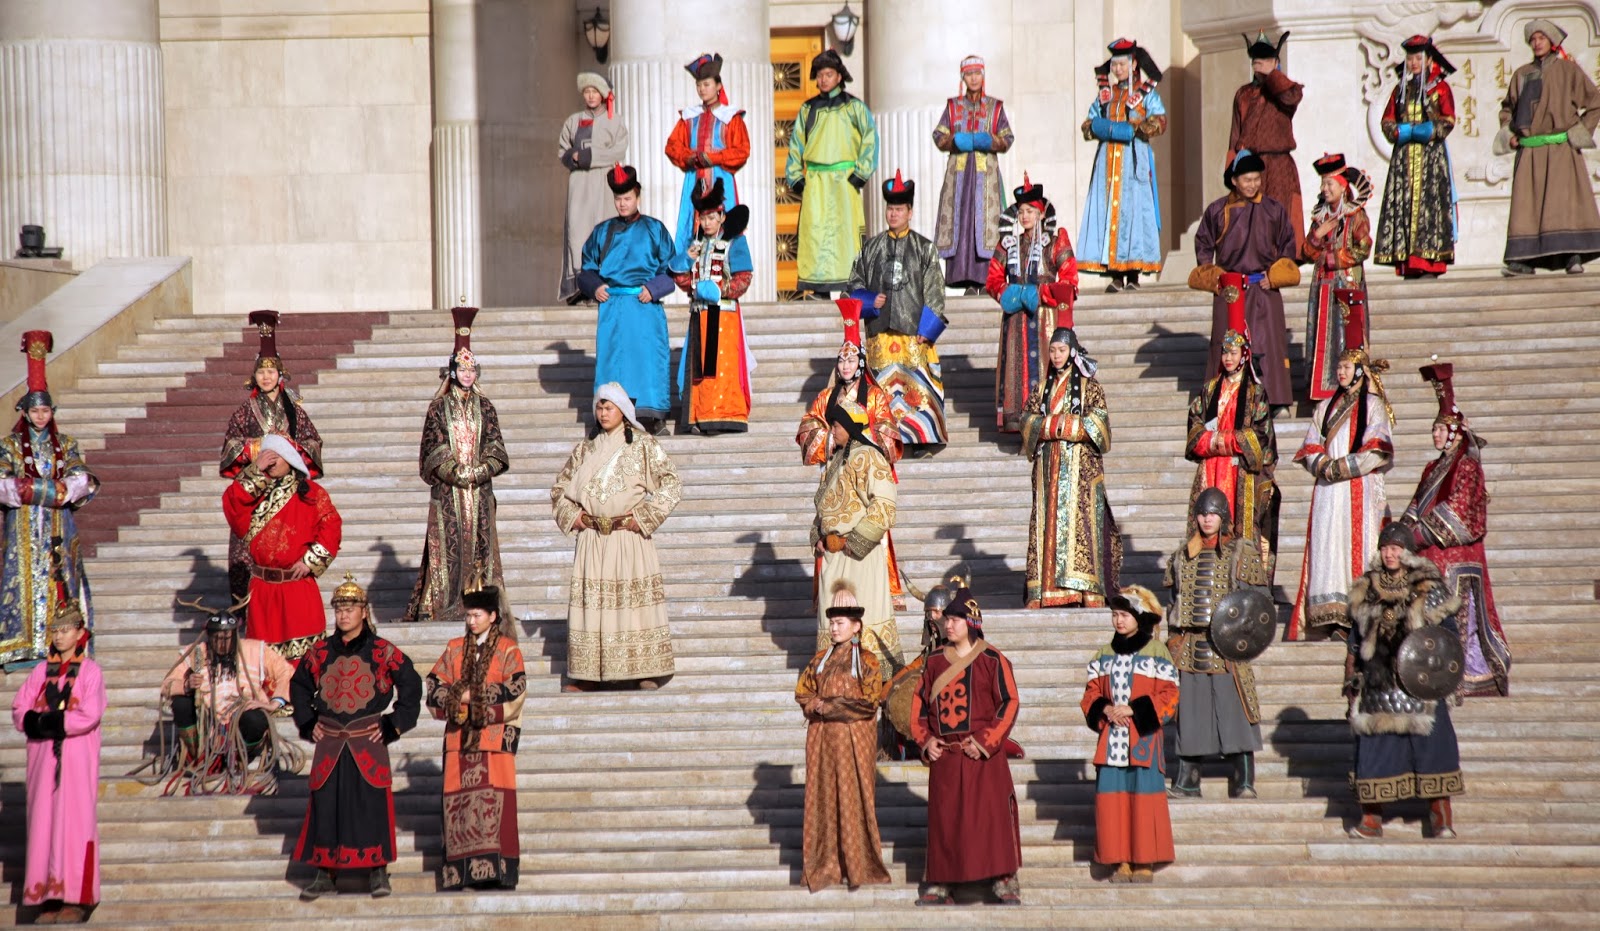 ANCIENT MONGOLIA & TRADITIONAL GARMENTS Honoring+tradtional+tirbes+and+dress+of+Mongolia1